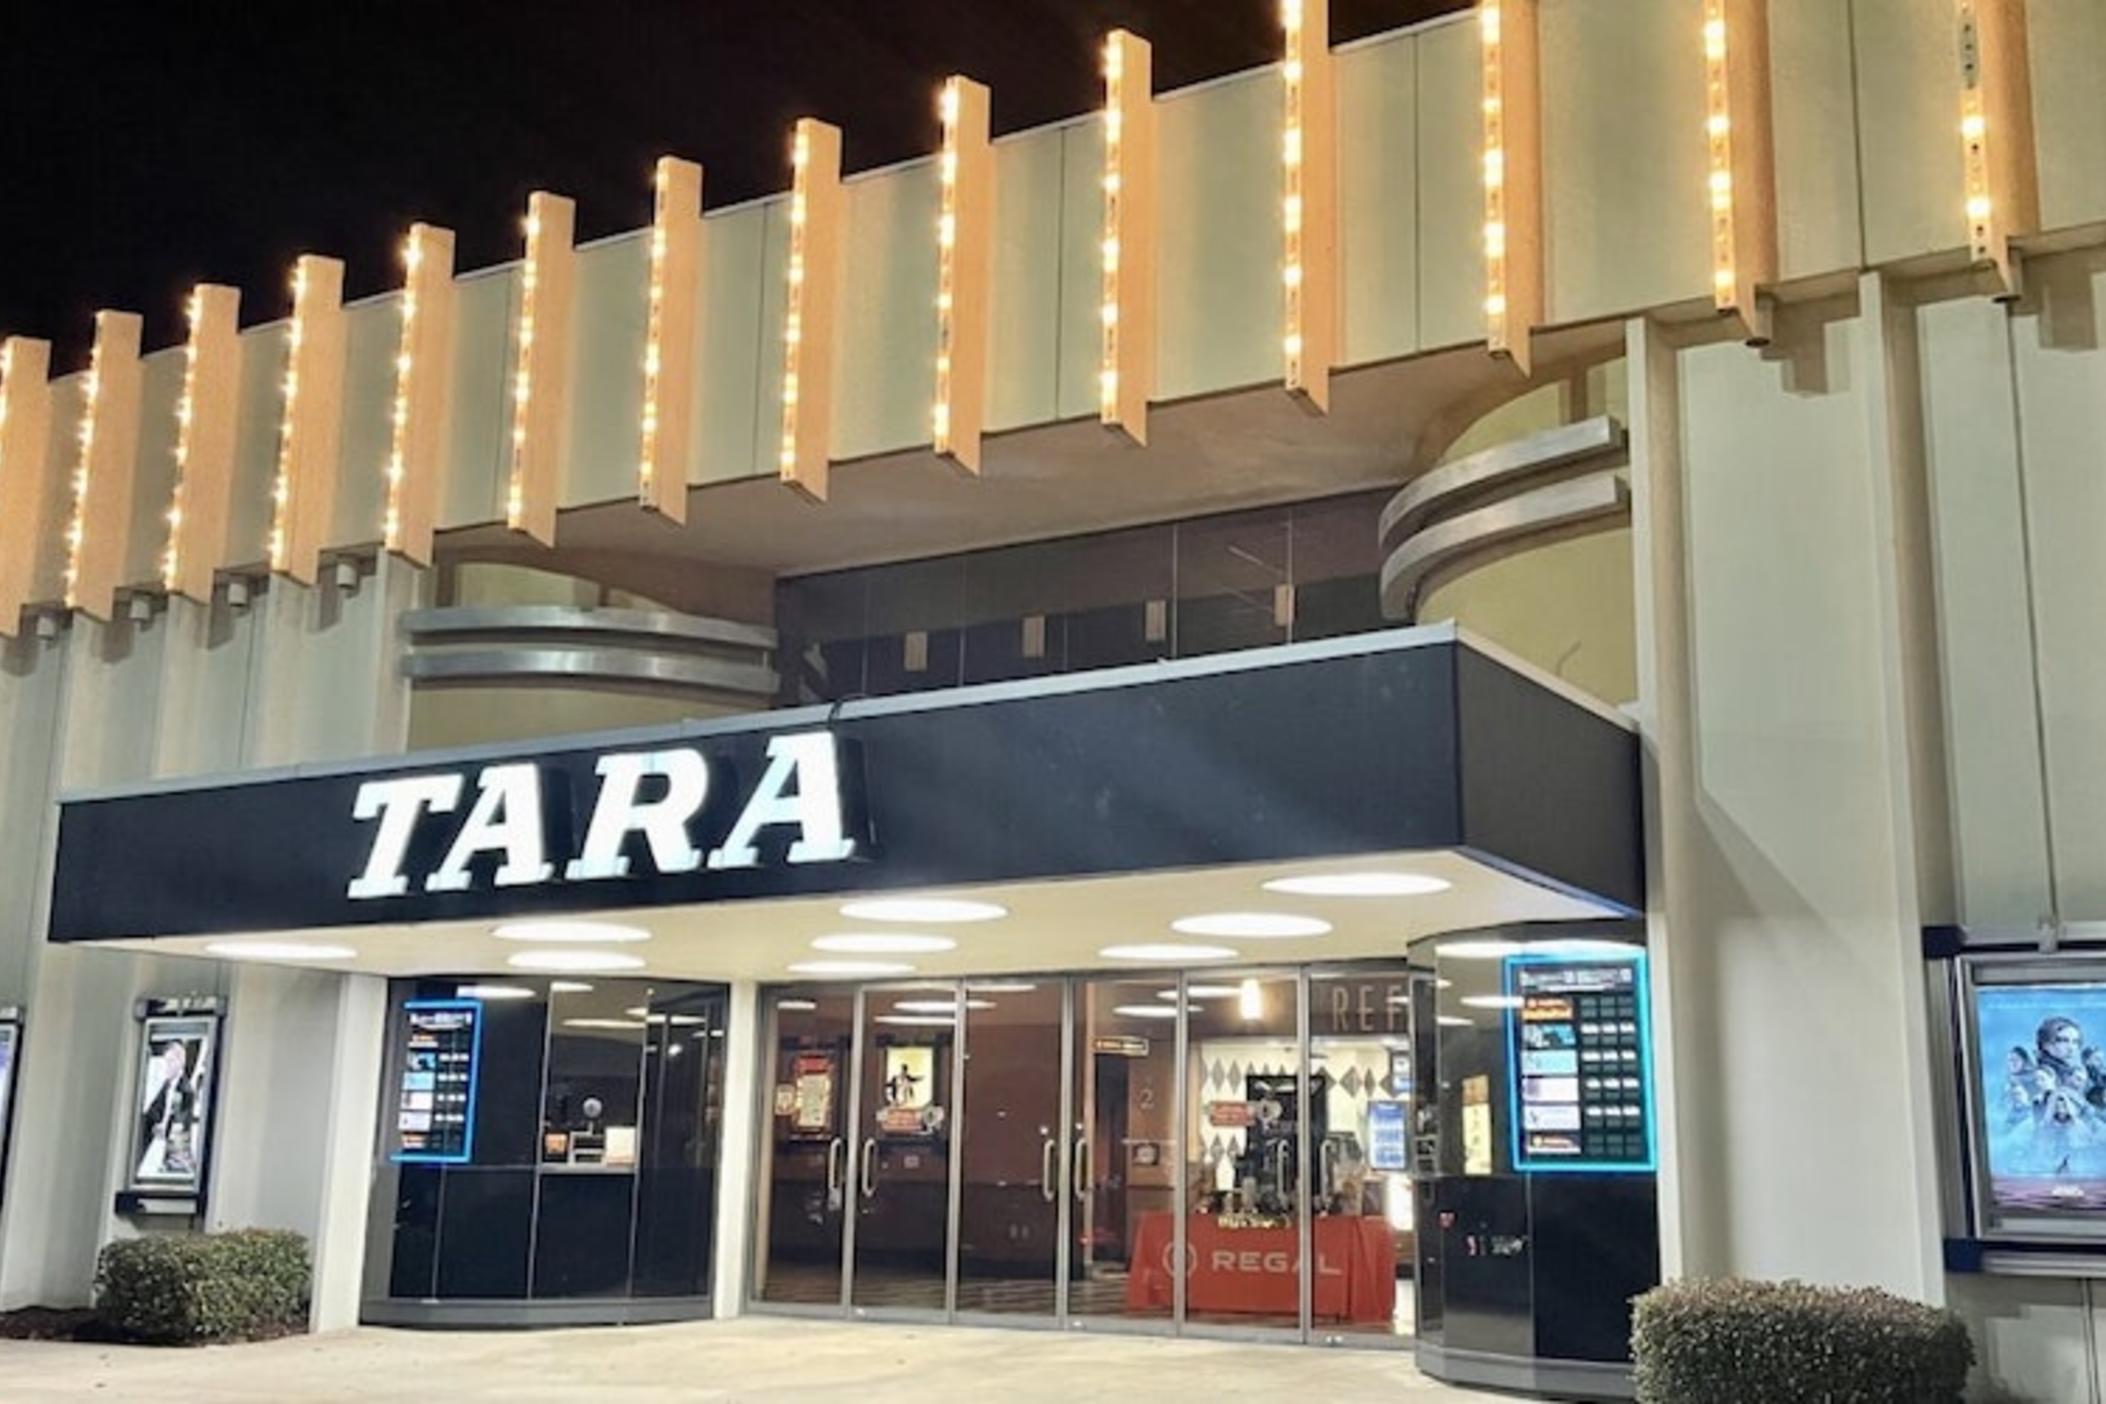 After closing its doors November 2022, the Tara theater is under new ownership and on track to reopen.